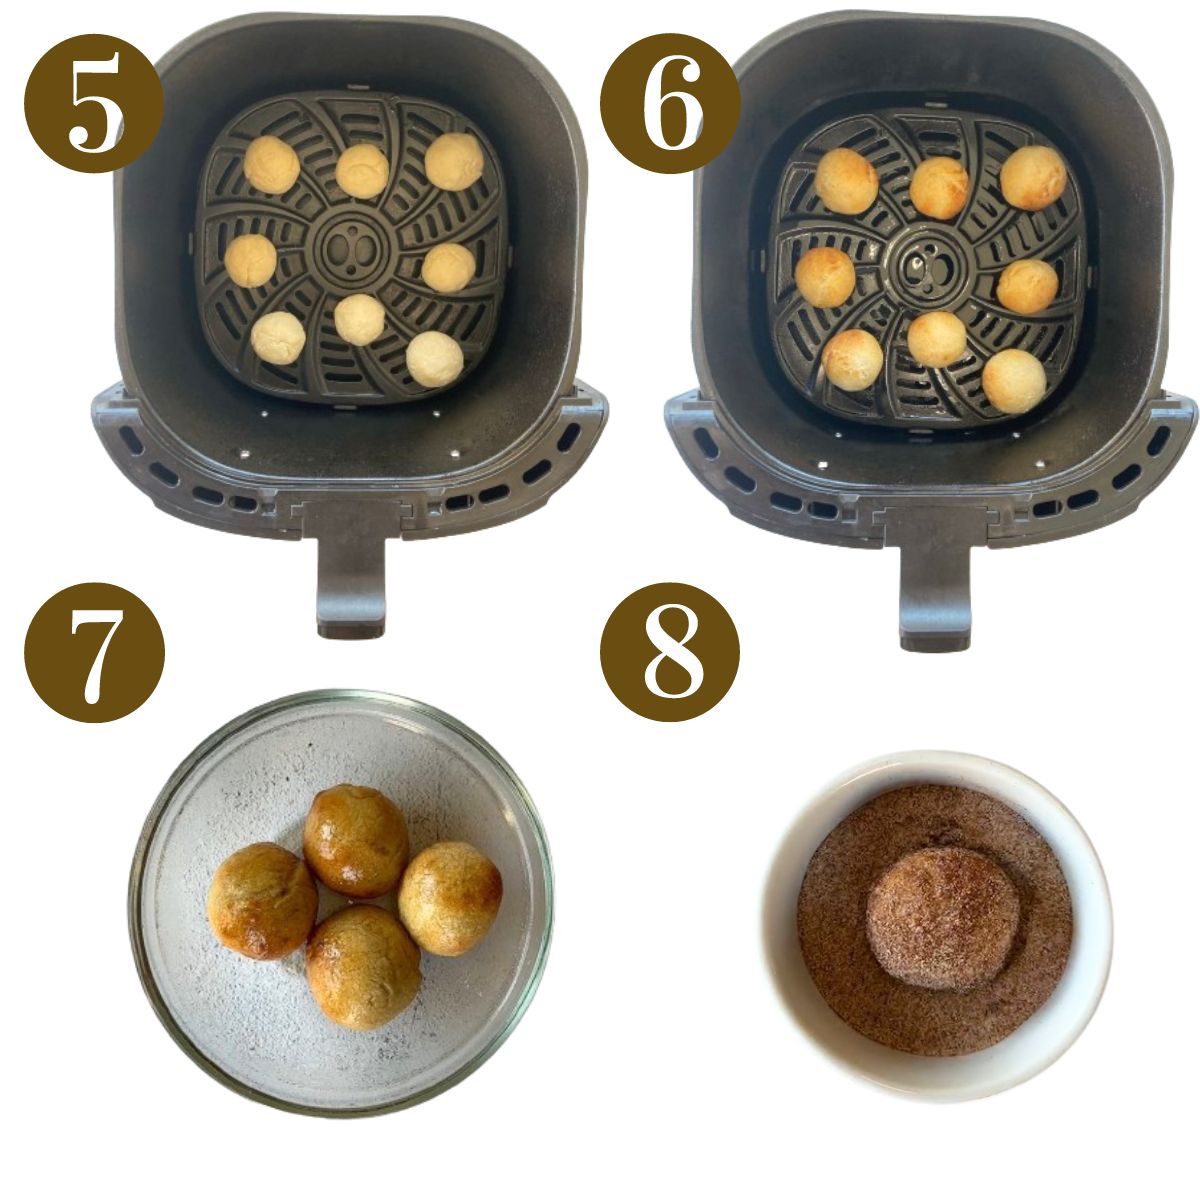 Steps to make air fryer donut holes.